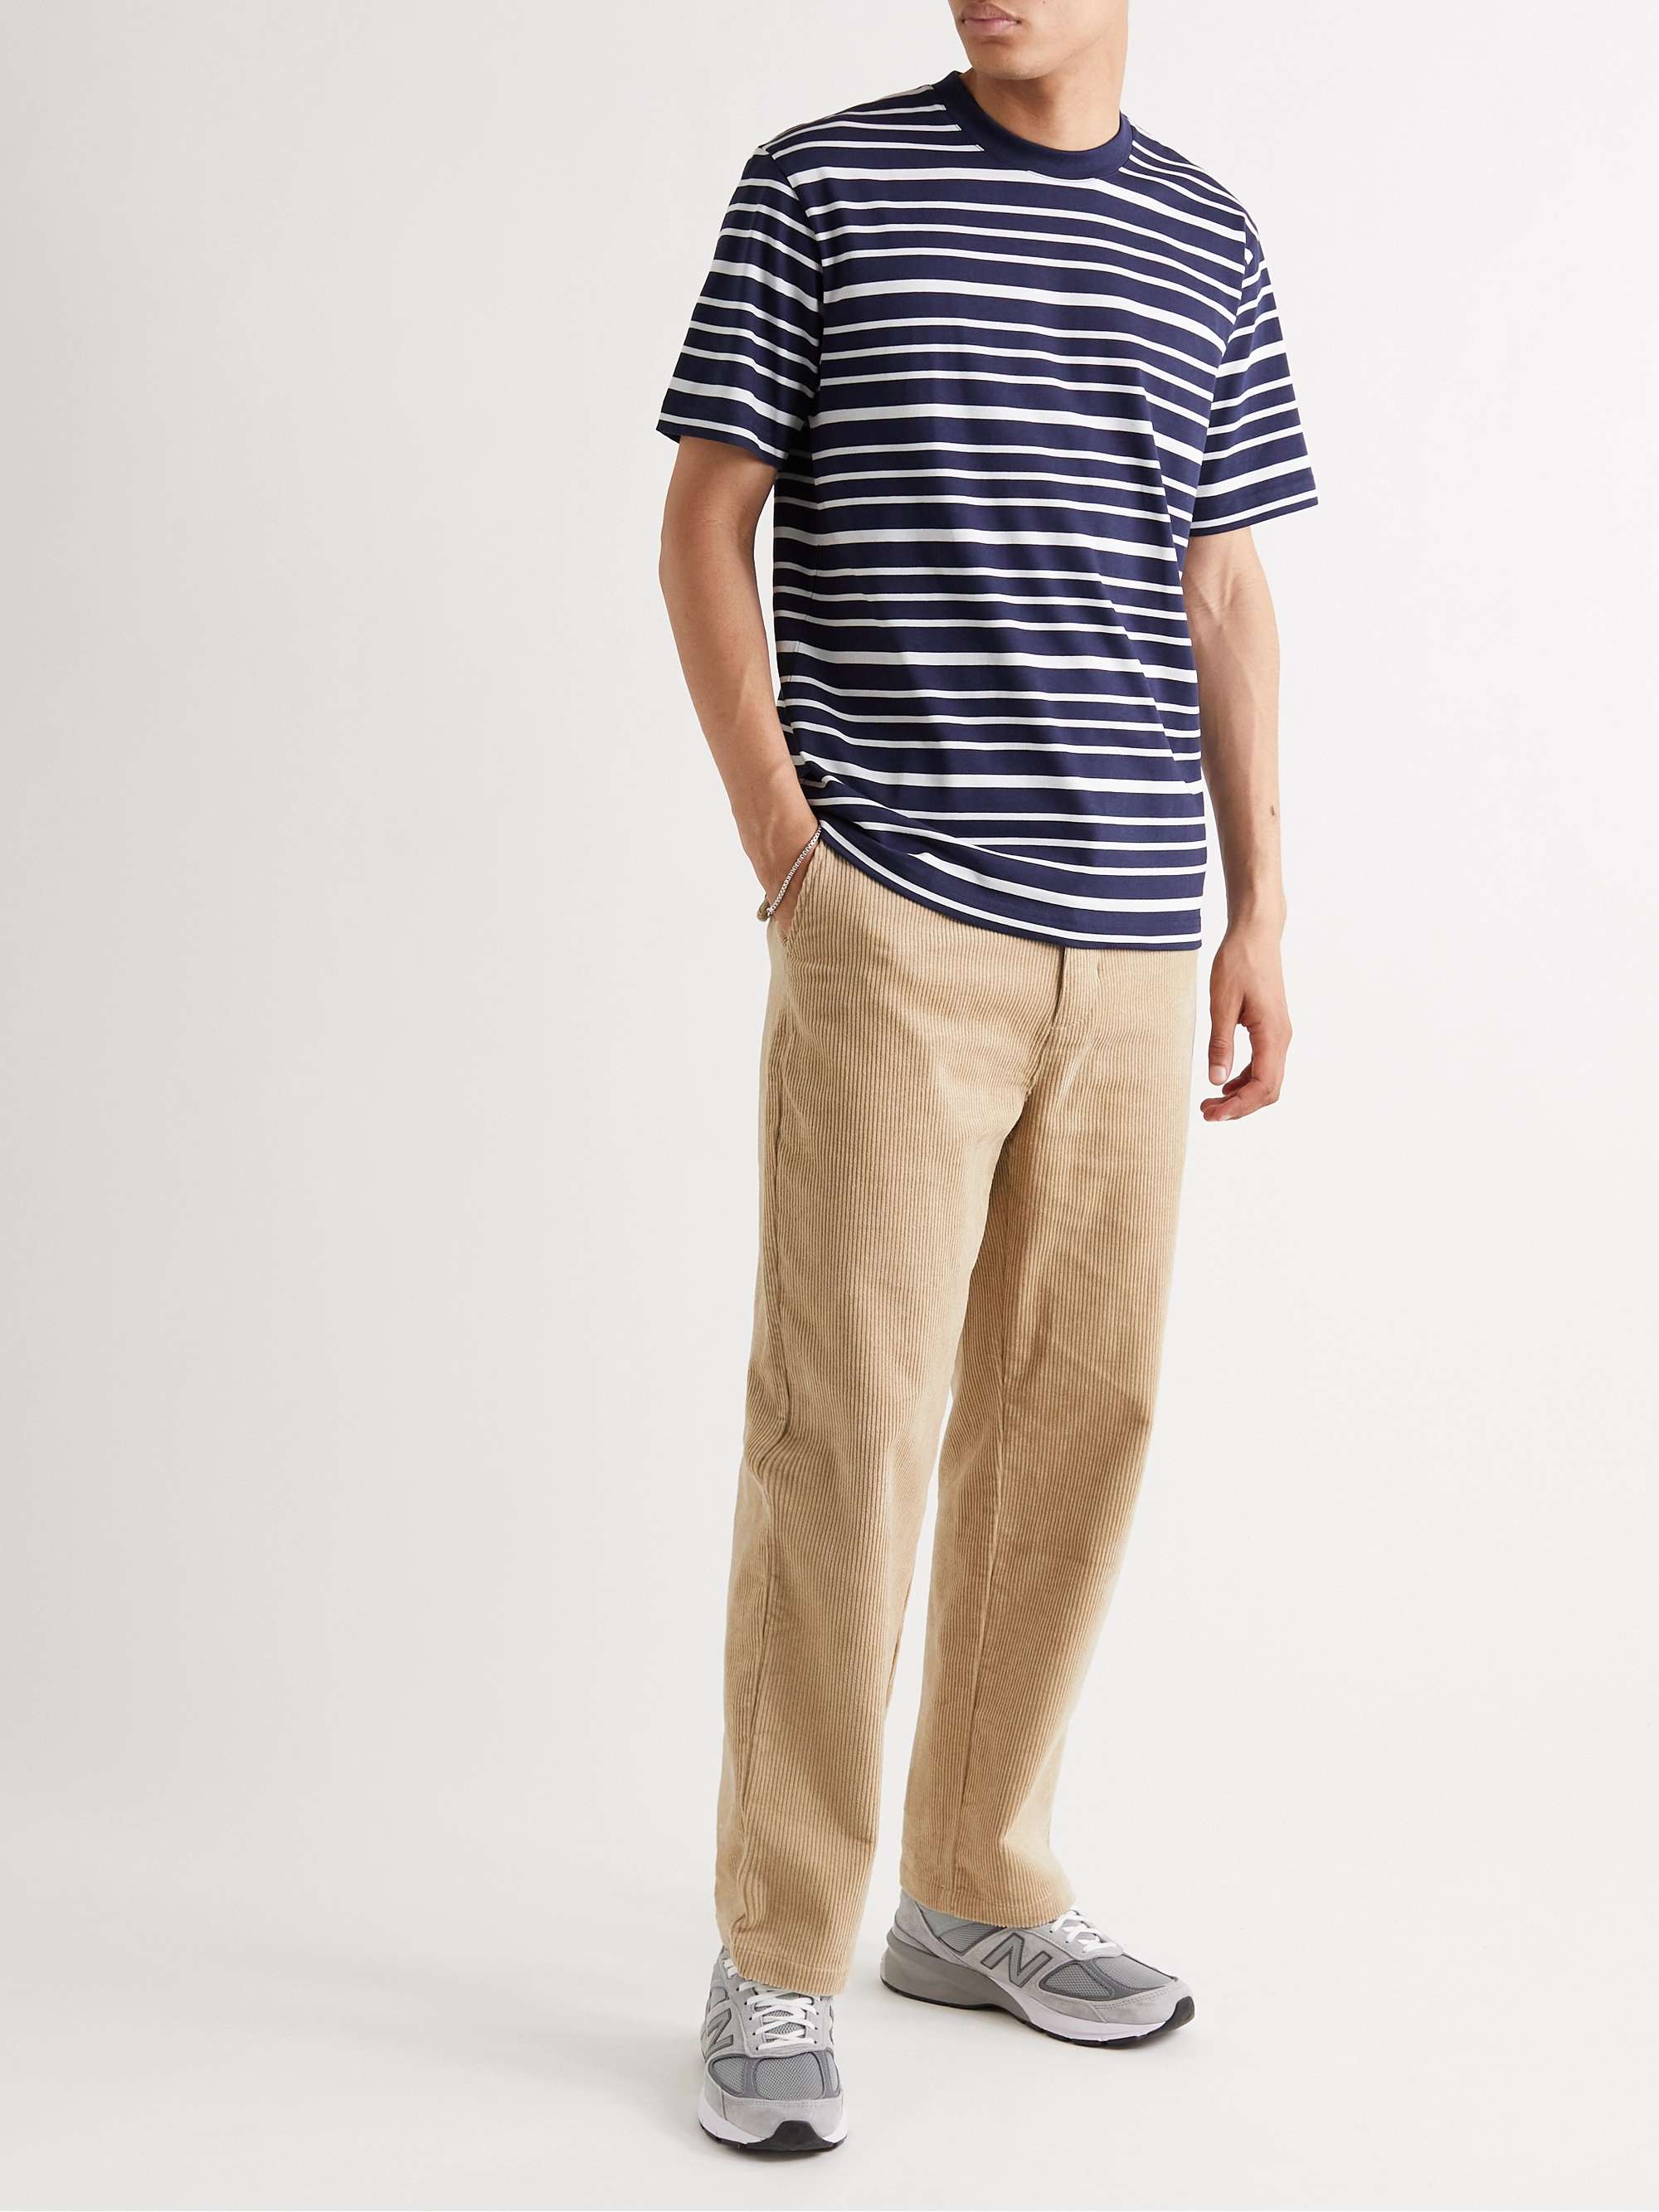 NORSE PROJECTS Johannes Striped Cotton-Jersey T-Shirt